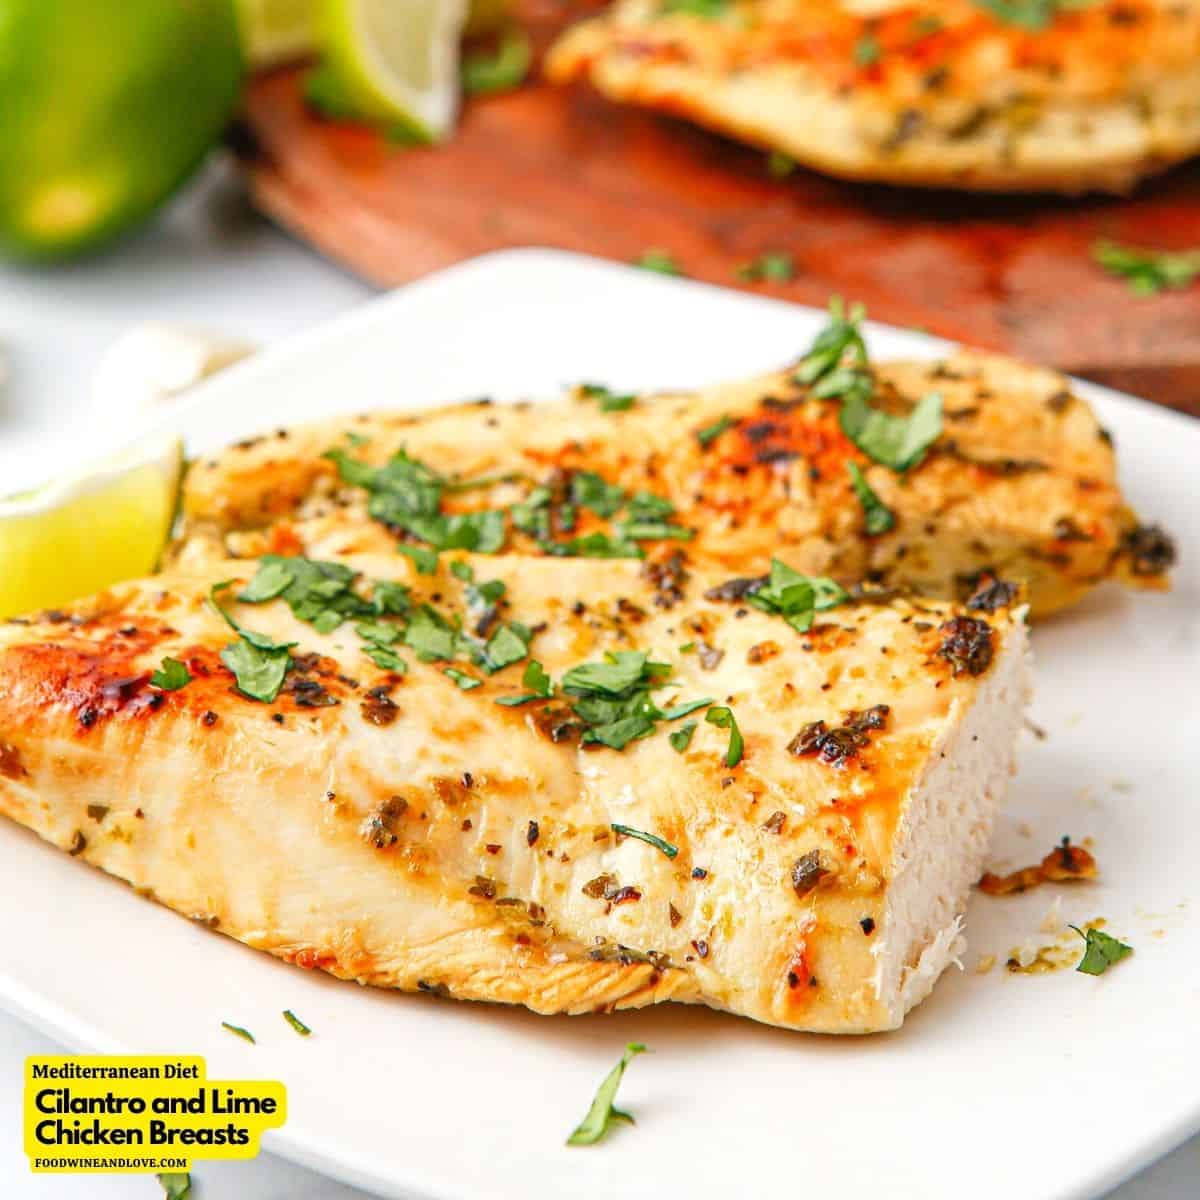 Mediterranean Diet Cilantro Lime Chicken Breasts, a simple and delicious dinner recipe made with chicken marinated in flavorful olive oil.